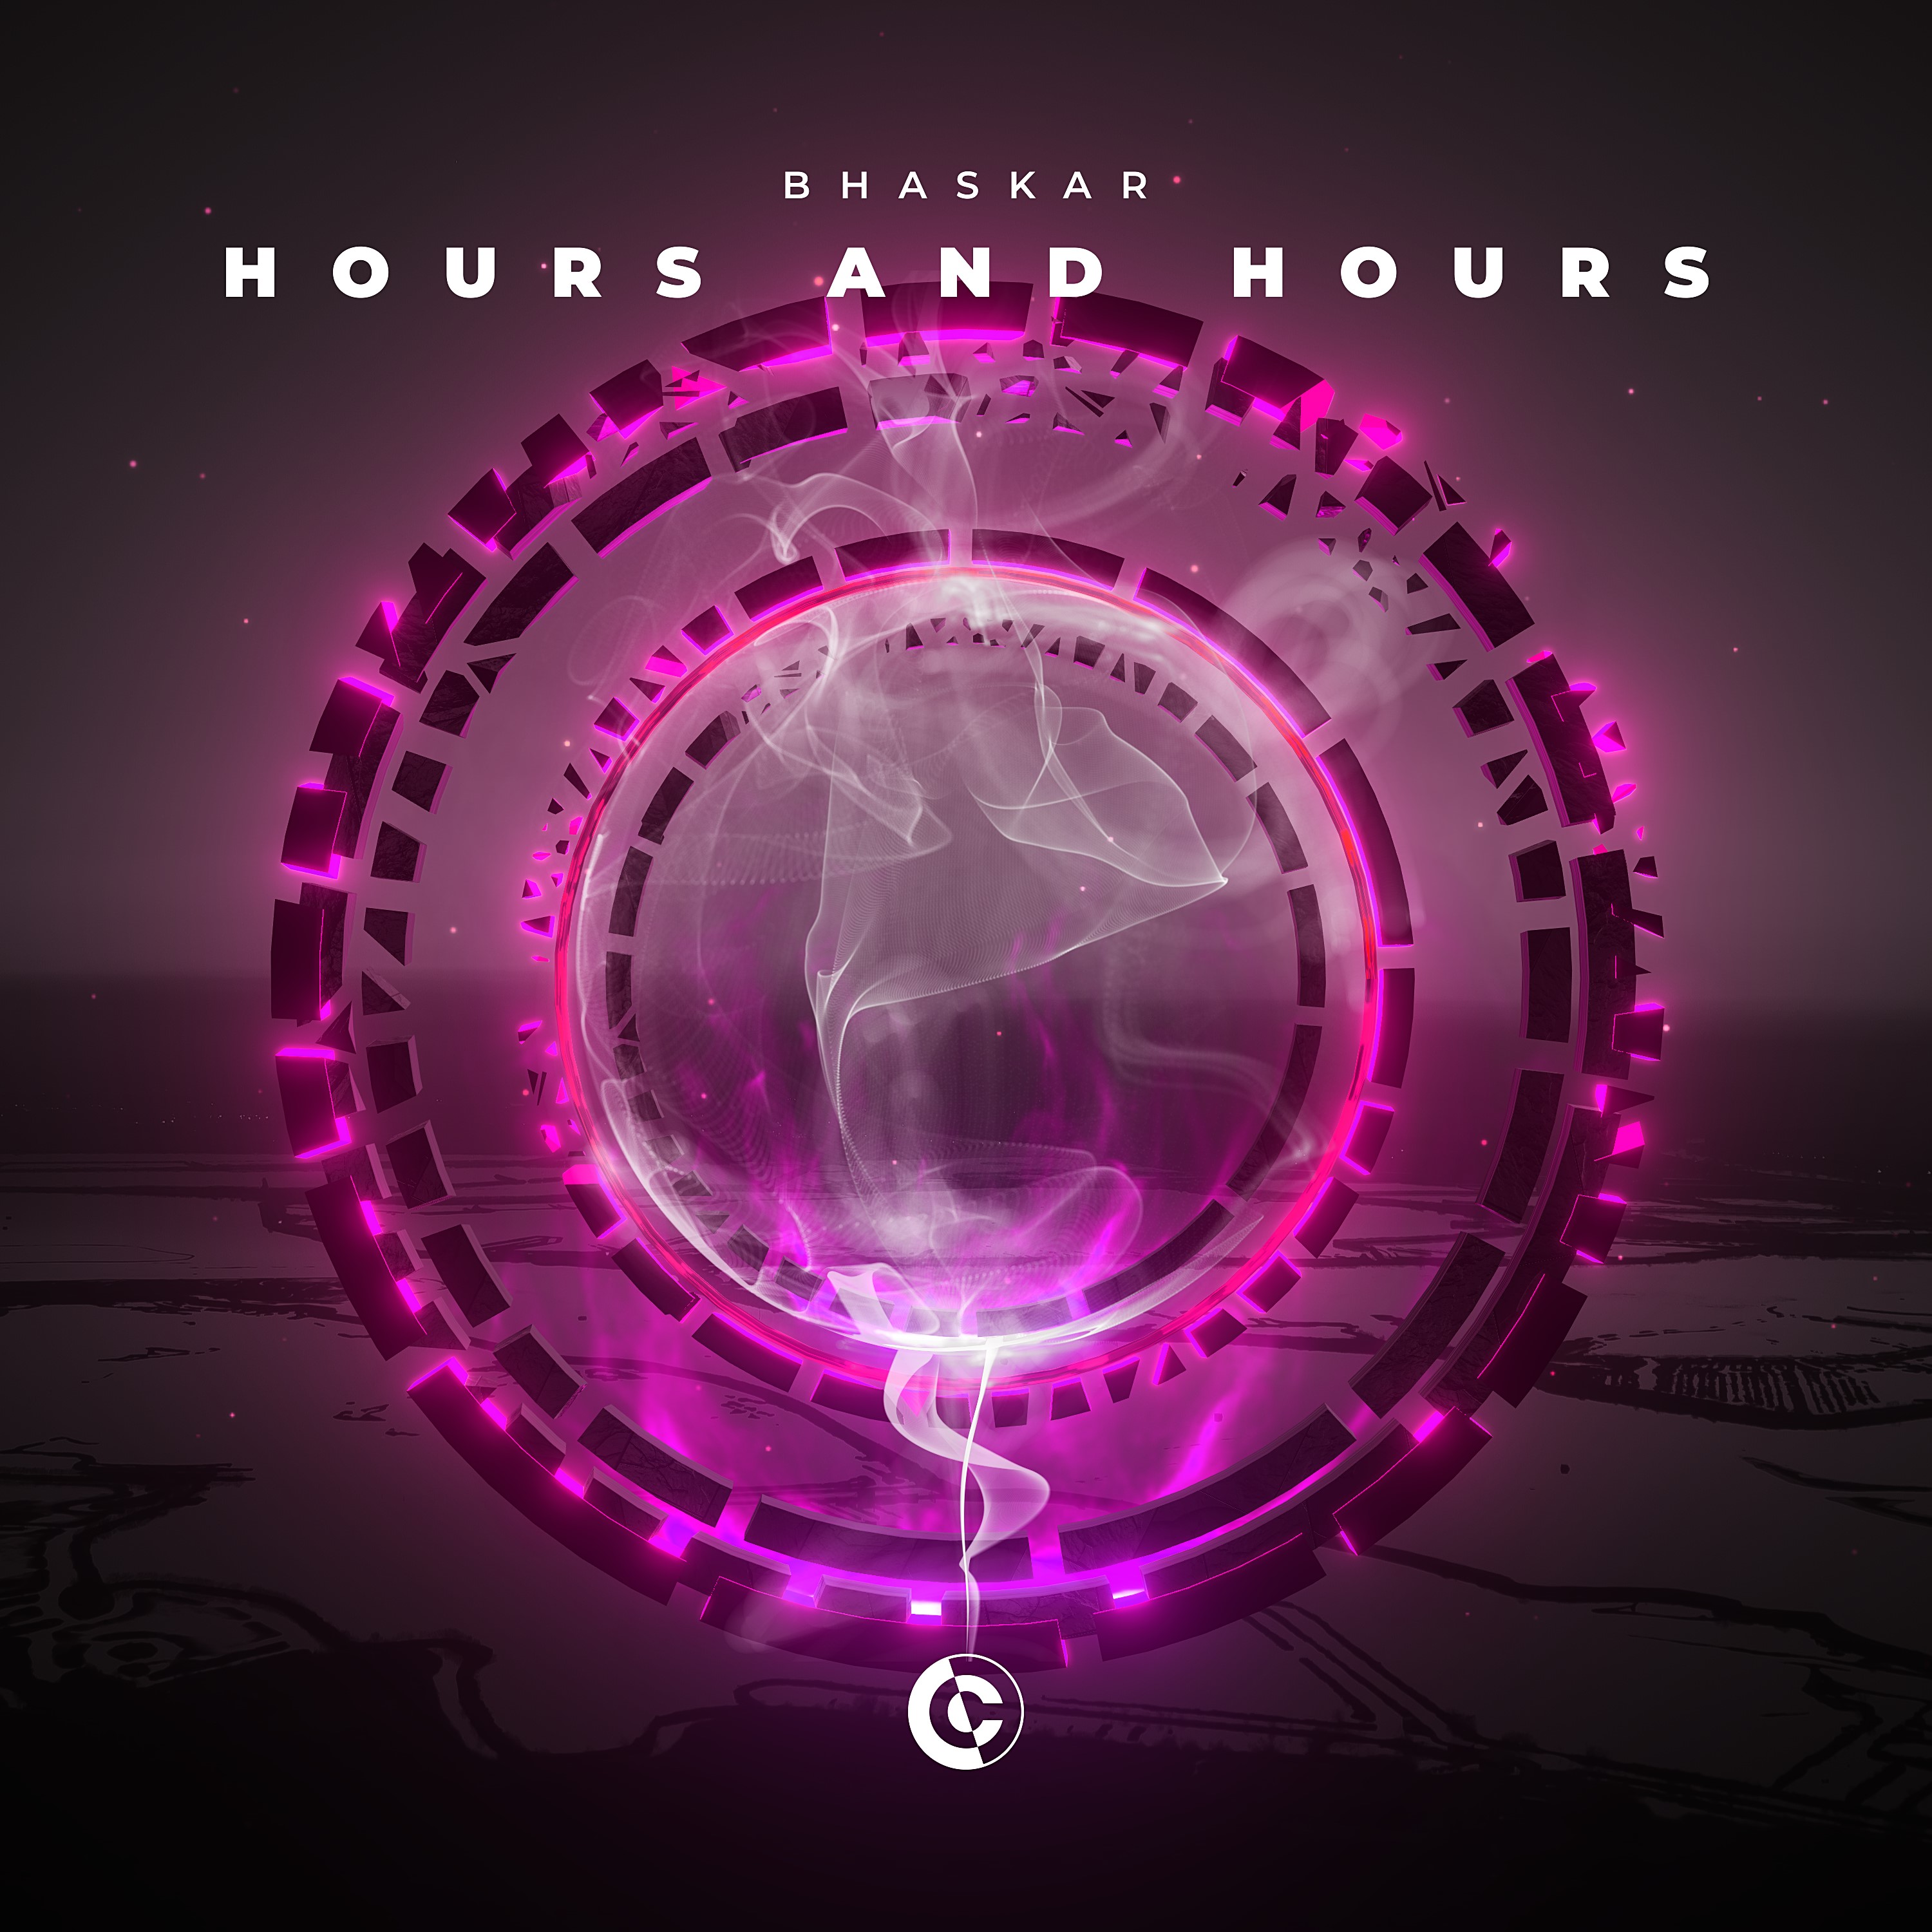 Bhaskar Delivers Mix of Vocal House & Retro Wave Grooves On New Track “Hours and Hours.” Out Now on CONTROVERSIA